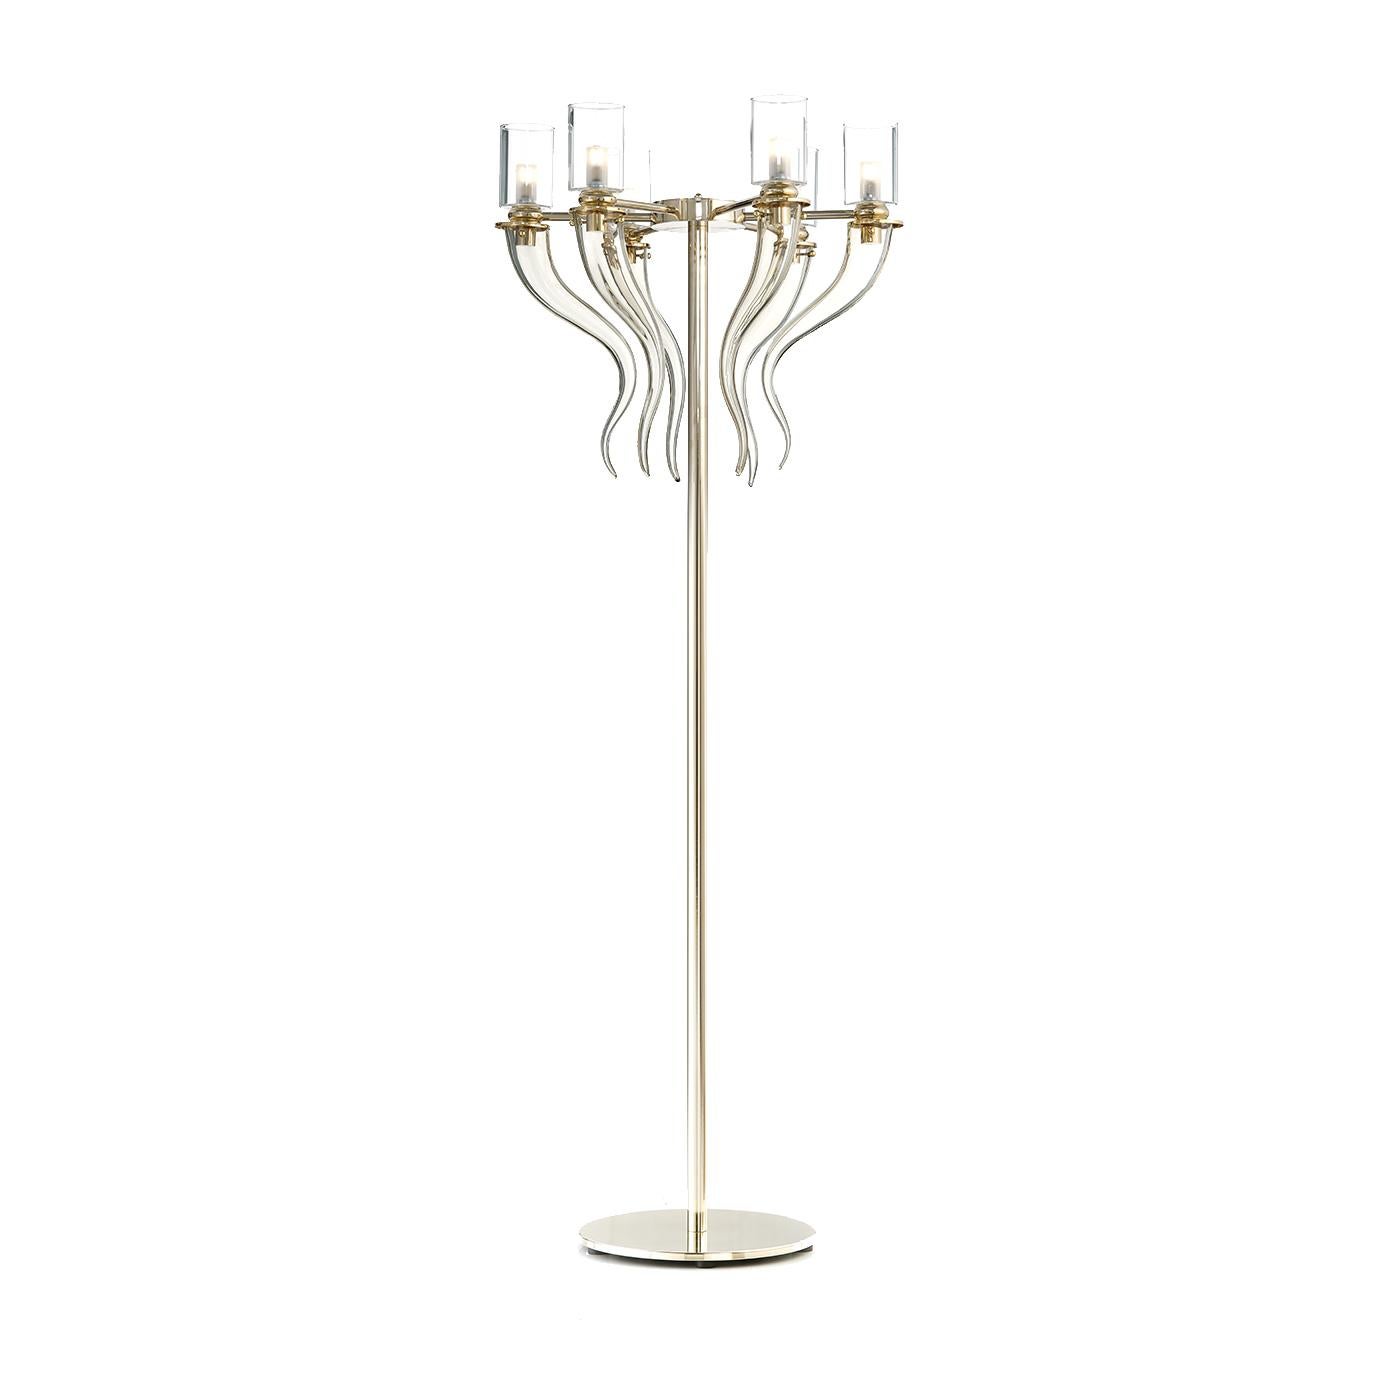 Part of the Honey collection, which includes the Honey Venetian glass table lamp and the Honey Venetian glass chandelier, this floor lamp blends traditional Venetian glass techniques with a modern sensibility for a timeless affect that makes it